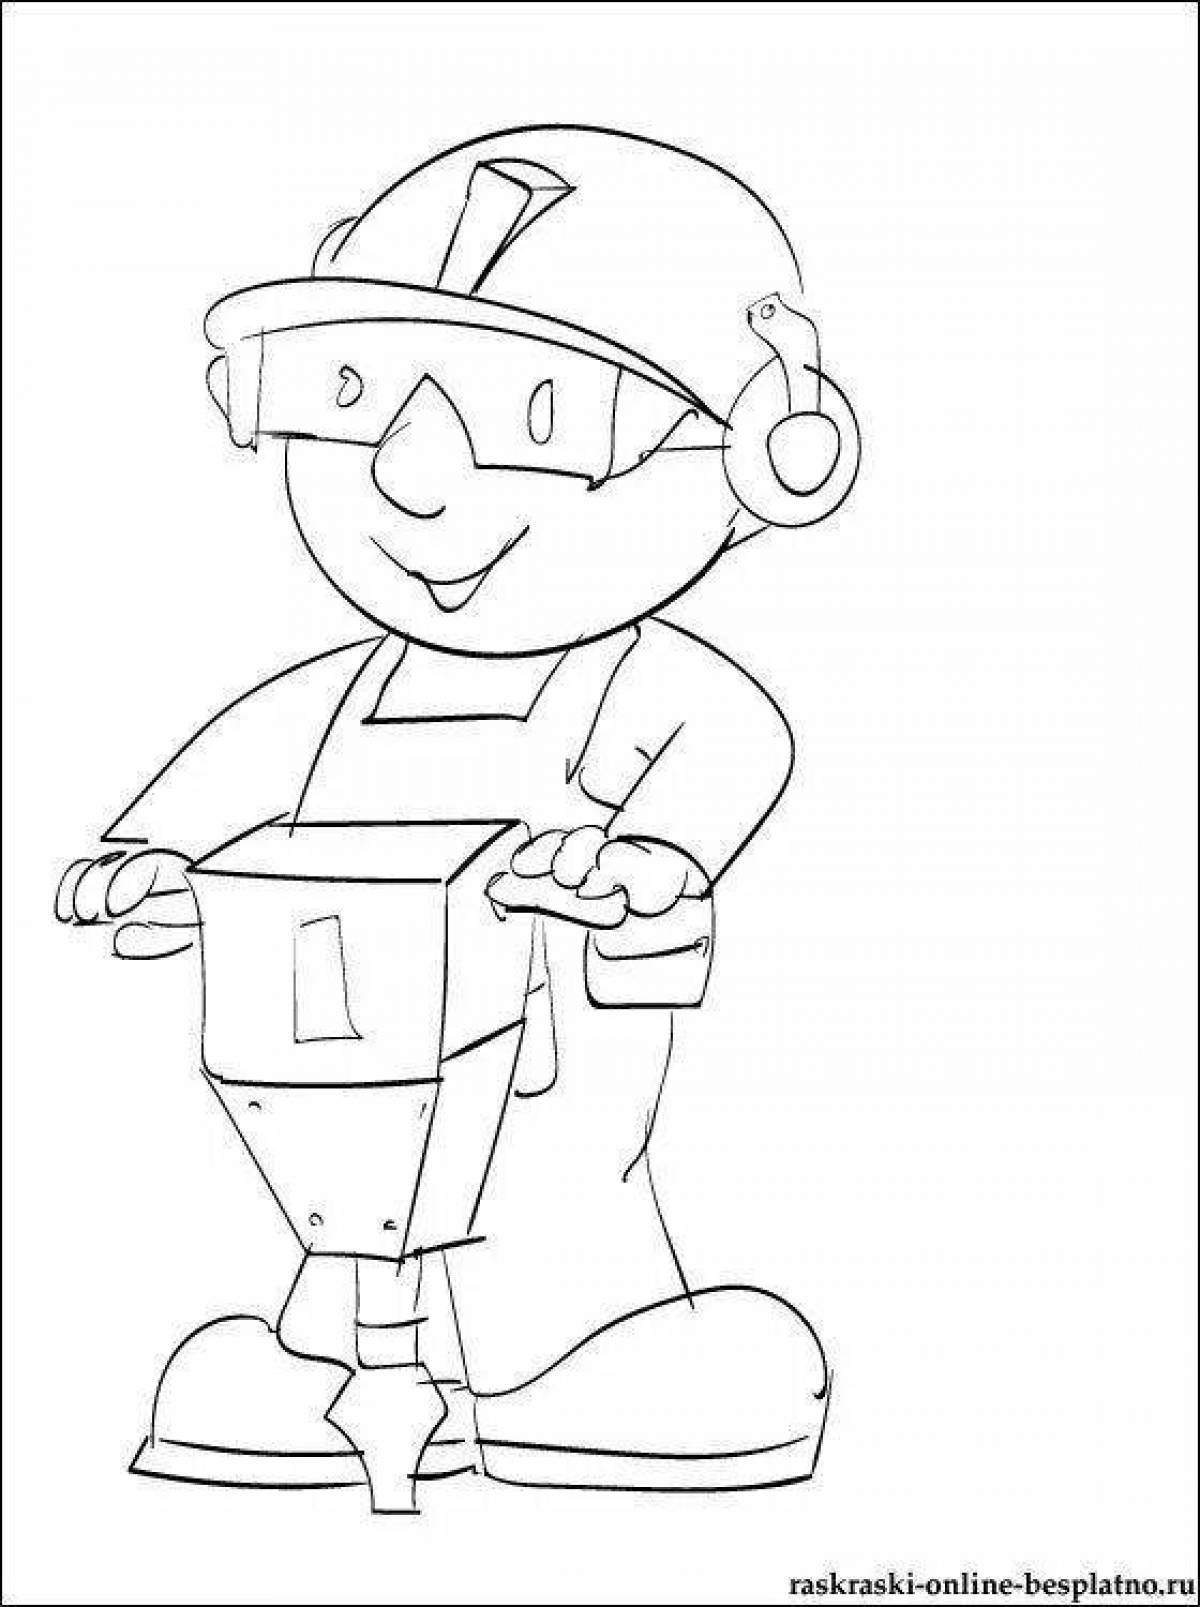 Fancy coloring miner